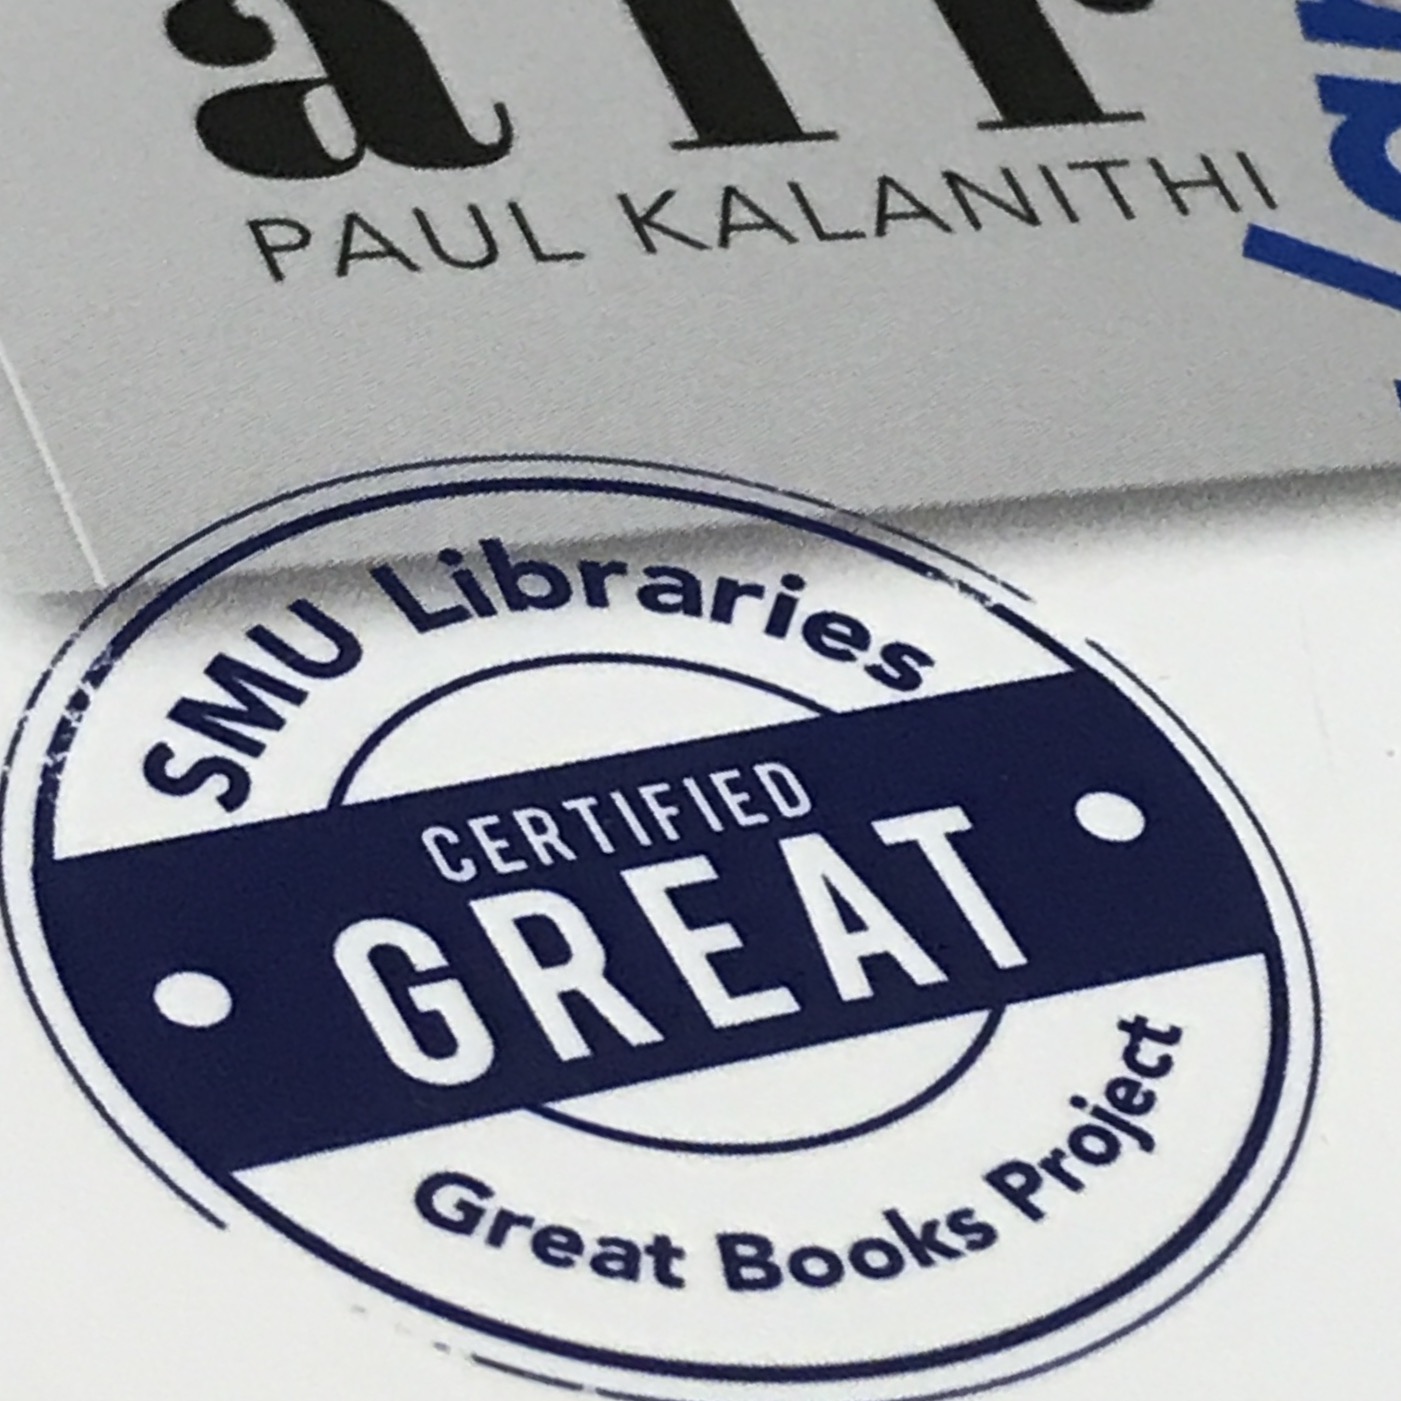 The Great Books Project